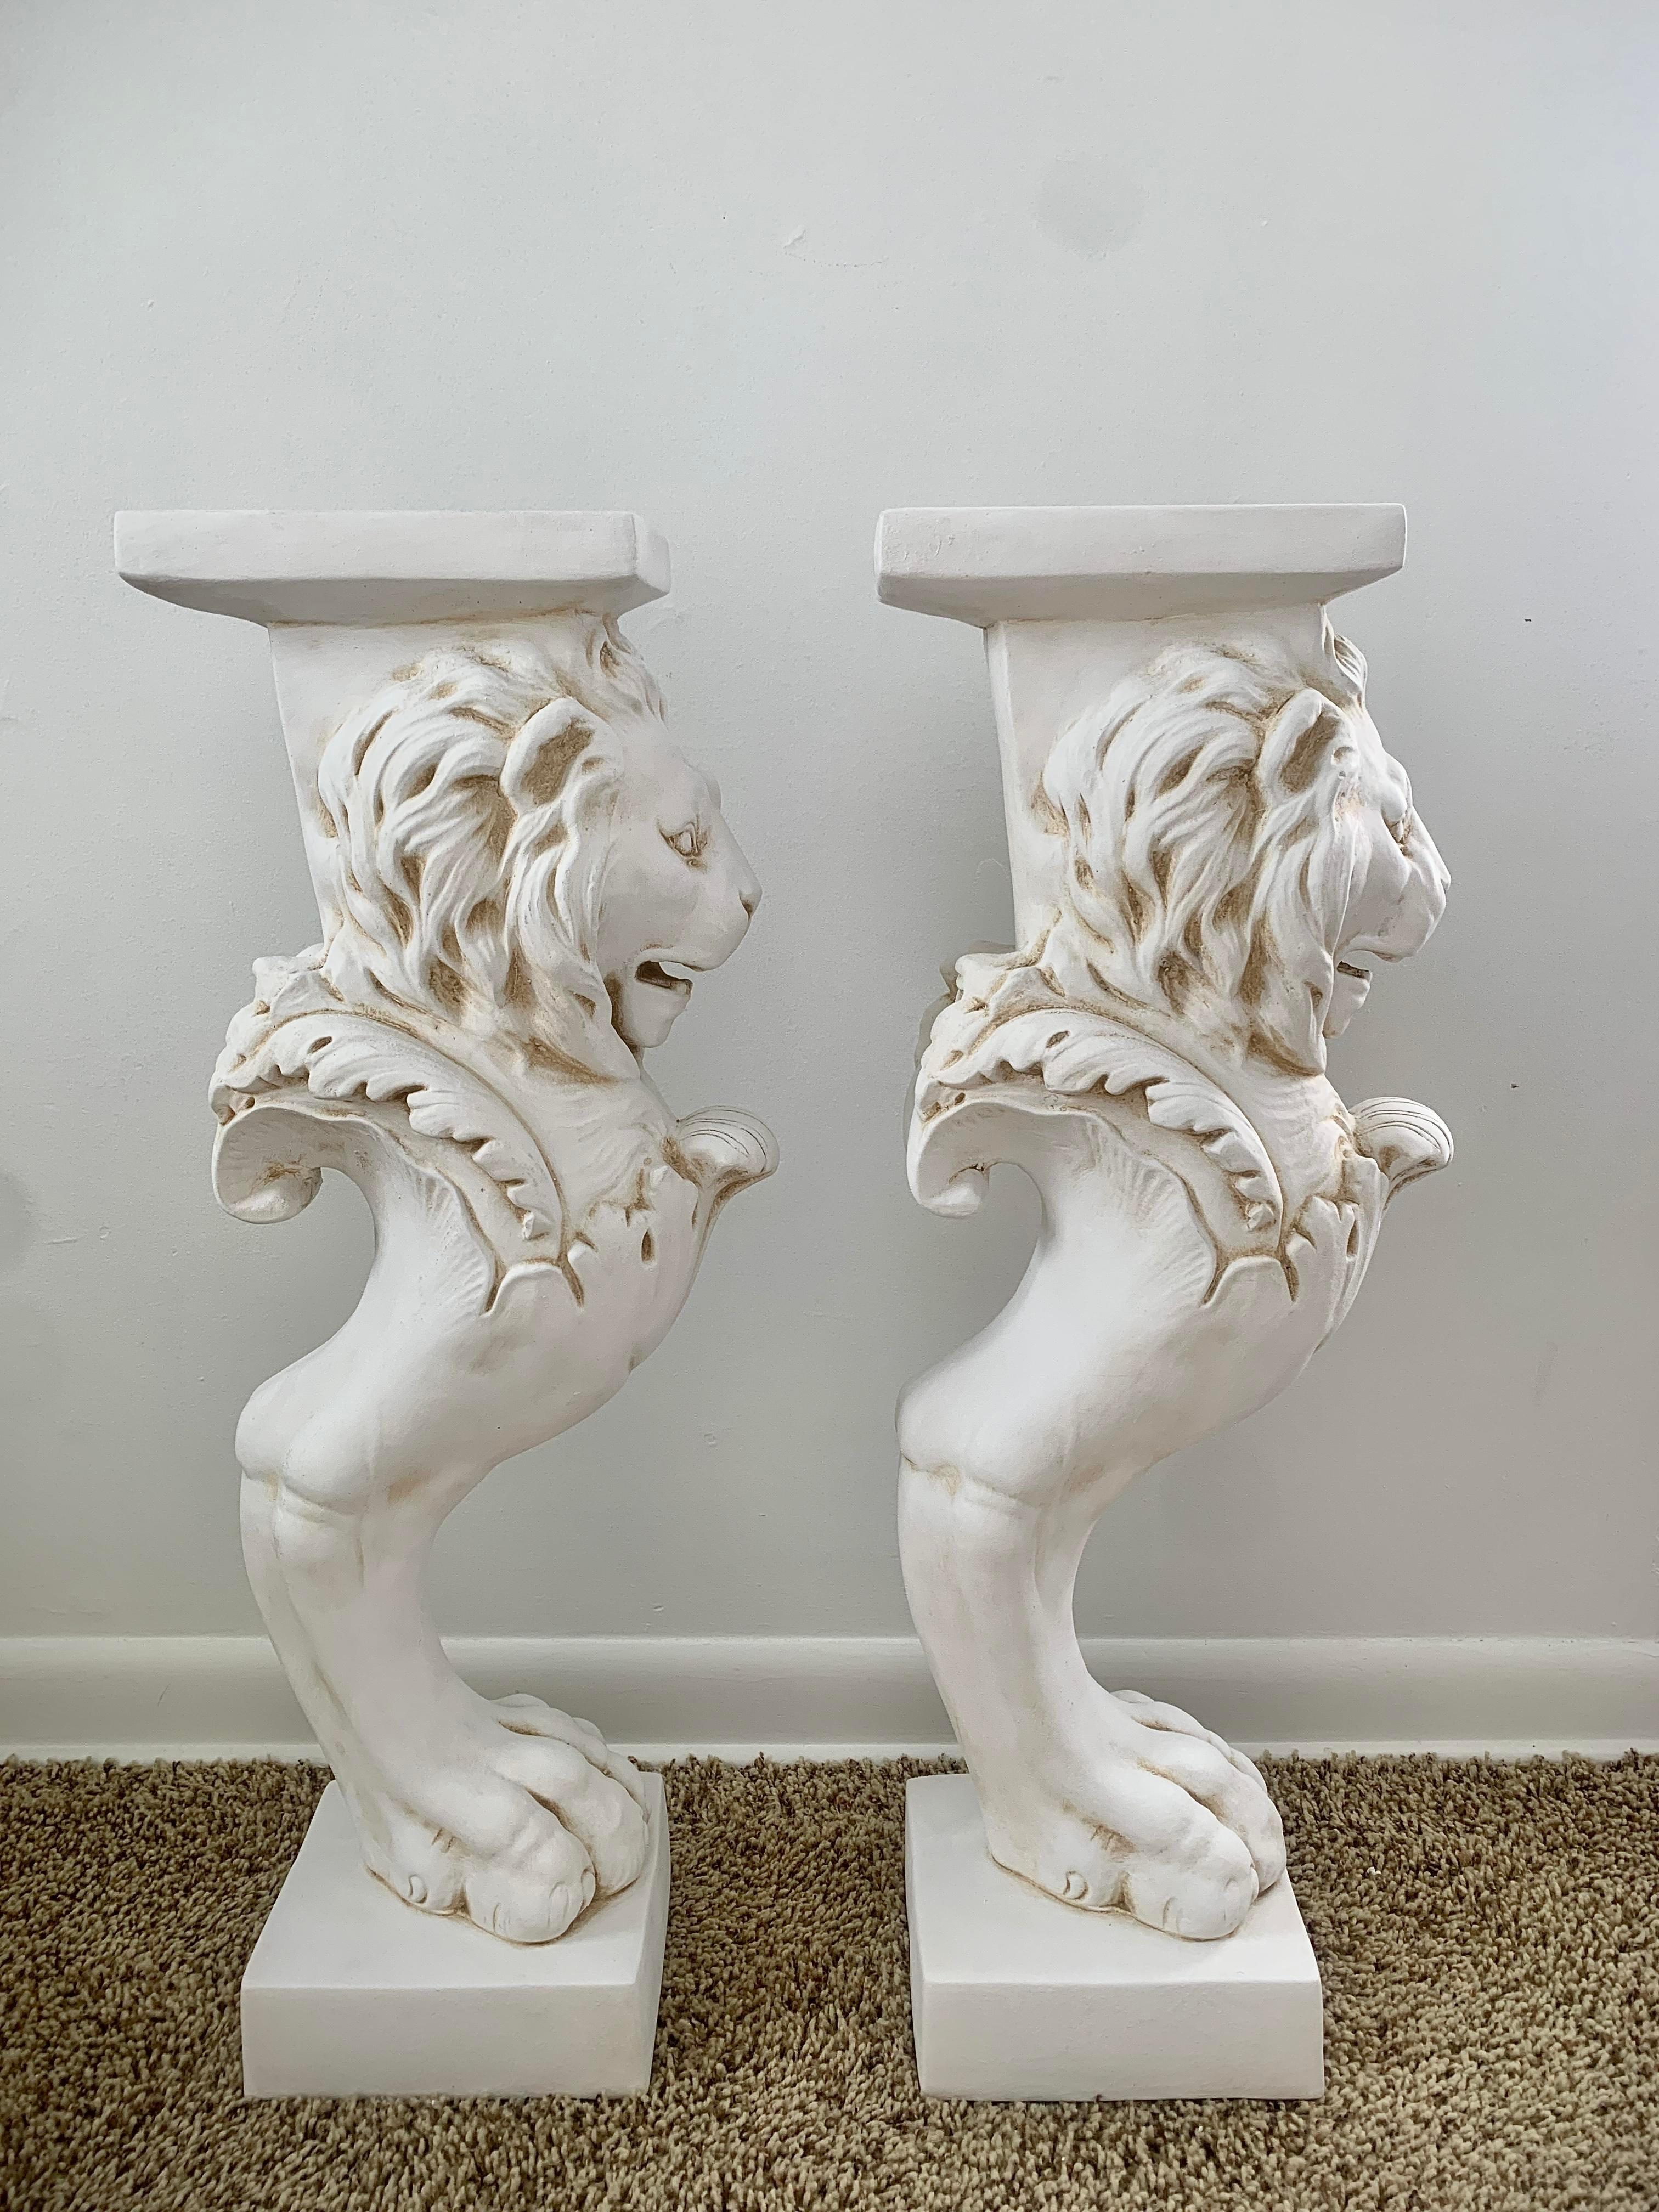 Neoclassical Plaster Roman Lion Pedestals, a Pair In Good Condition For Sale In Elkhart, IN